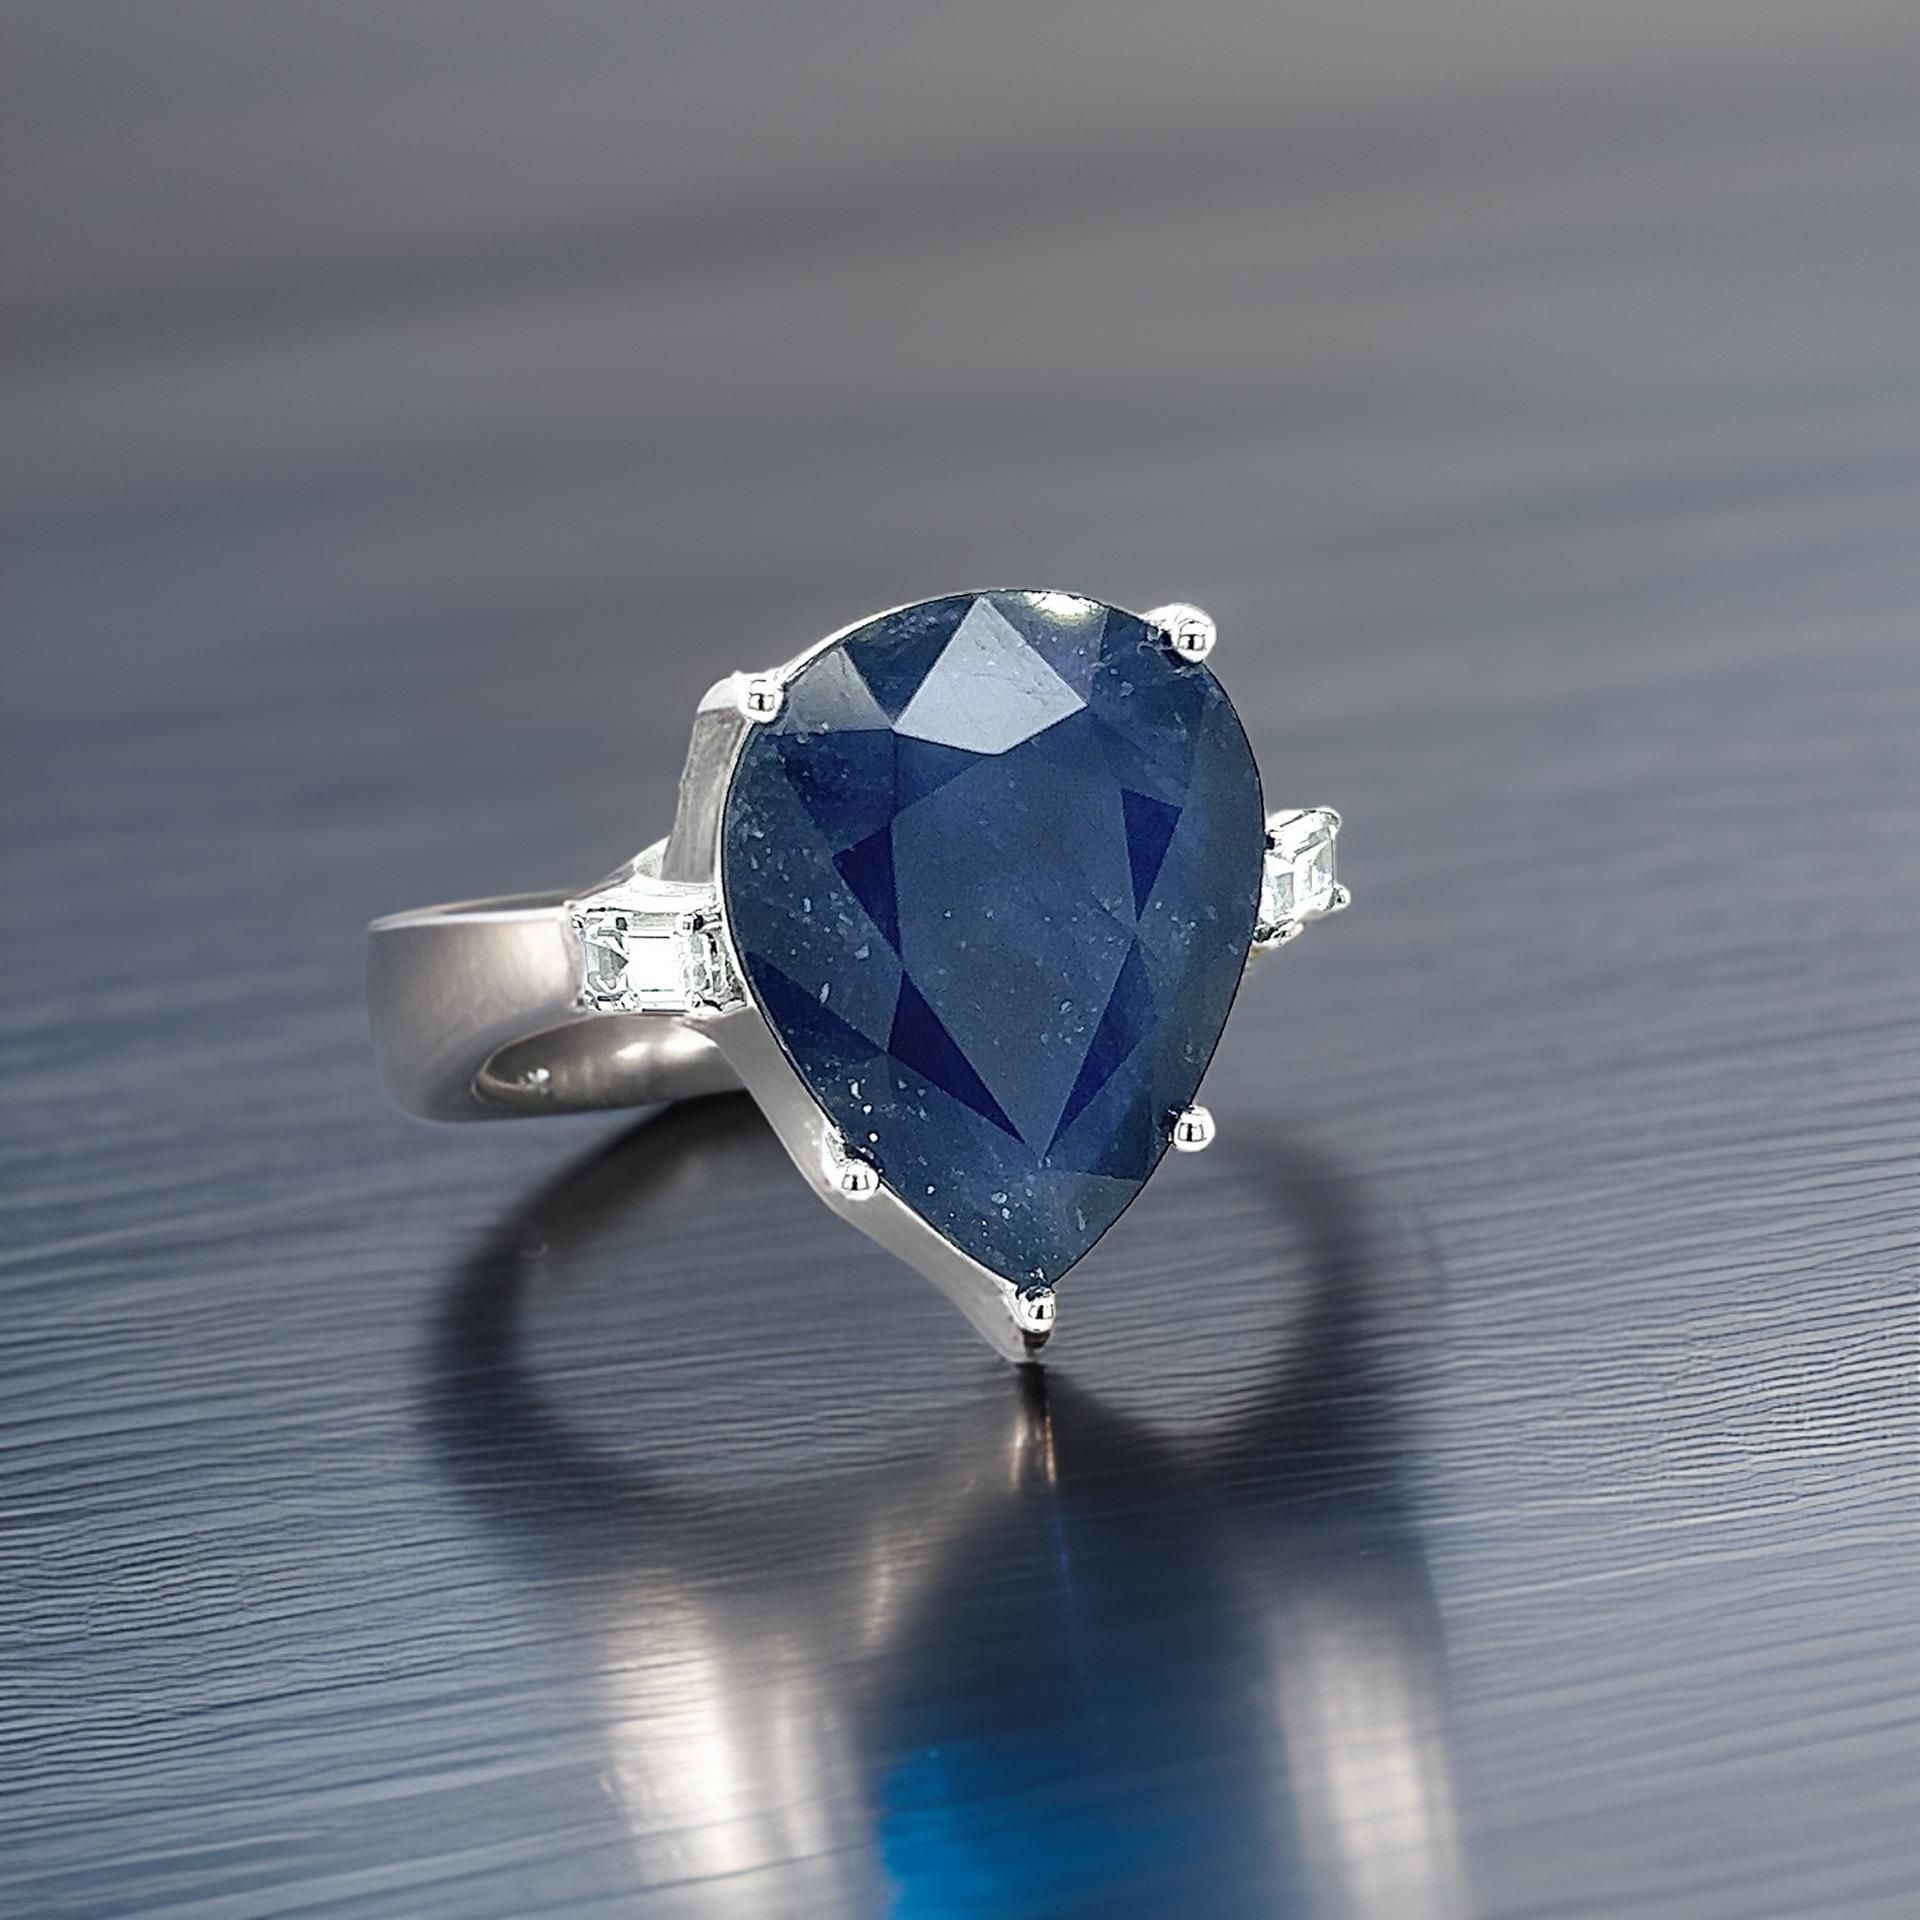 Natural Sapphire Diamond Ring Size 6.5 14k W Gold 17.73 TCW Certified For Sale 4